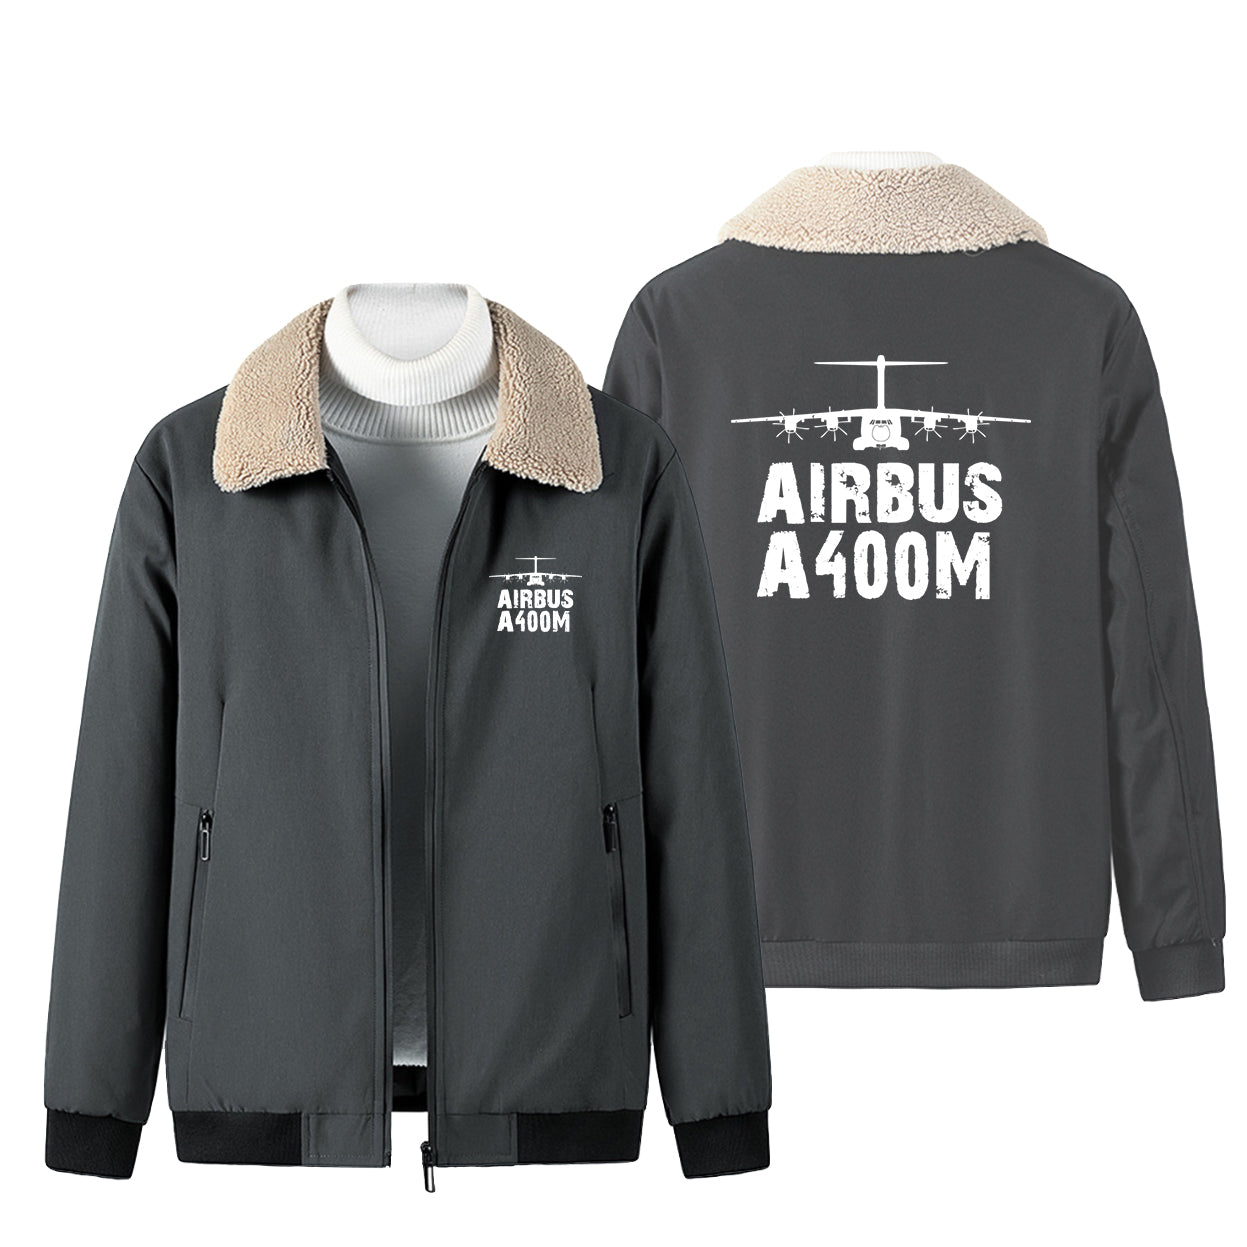 Airbus A400M & Plane Designed Winter Bomber Jackets